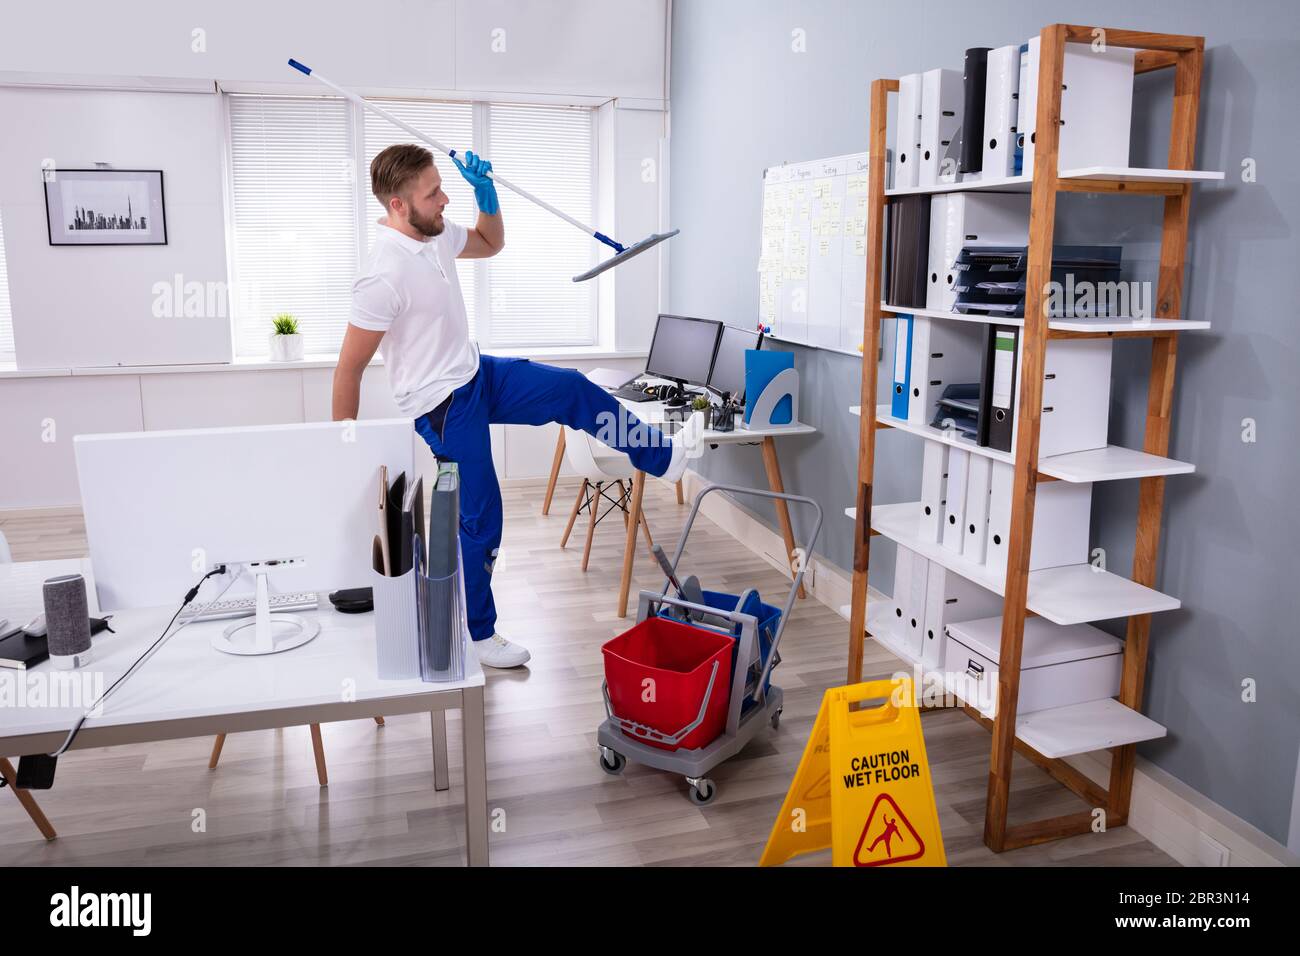 Man Janitor Slipping While Mopping Floor In Modern Office Stock Photo